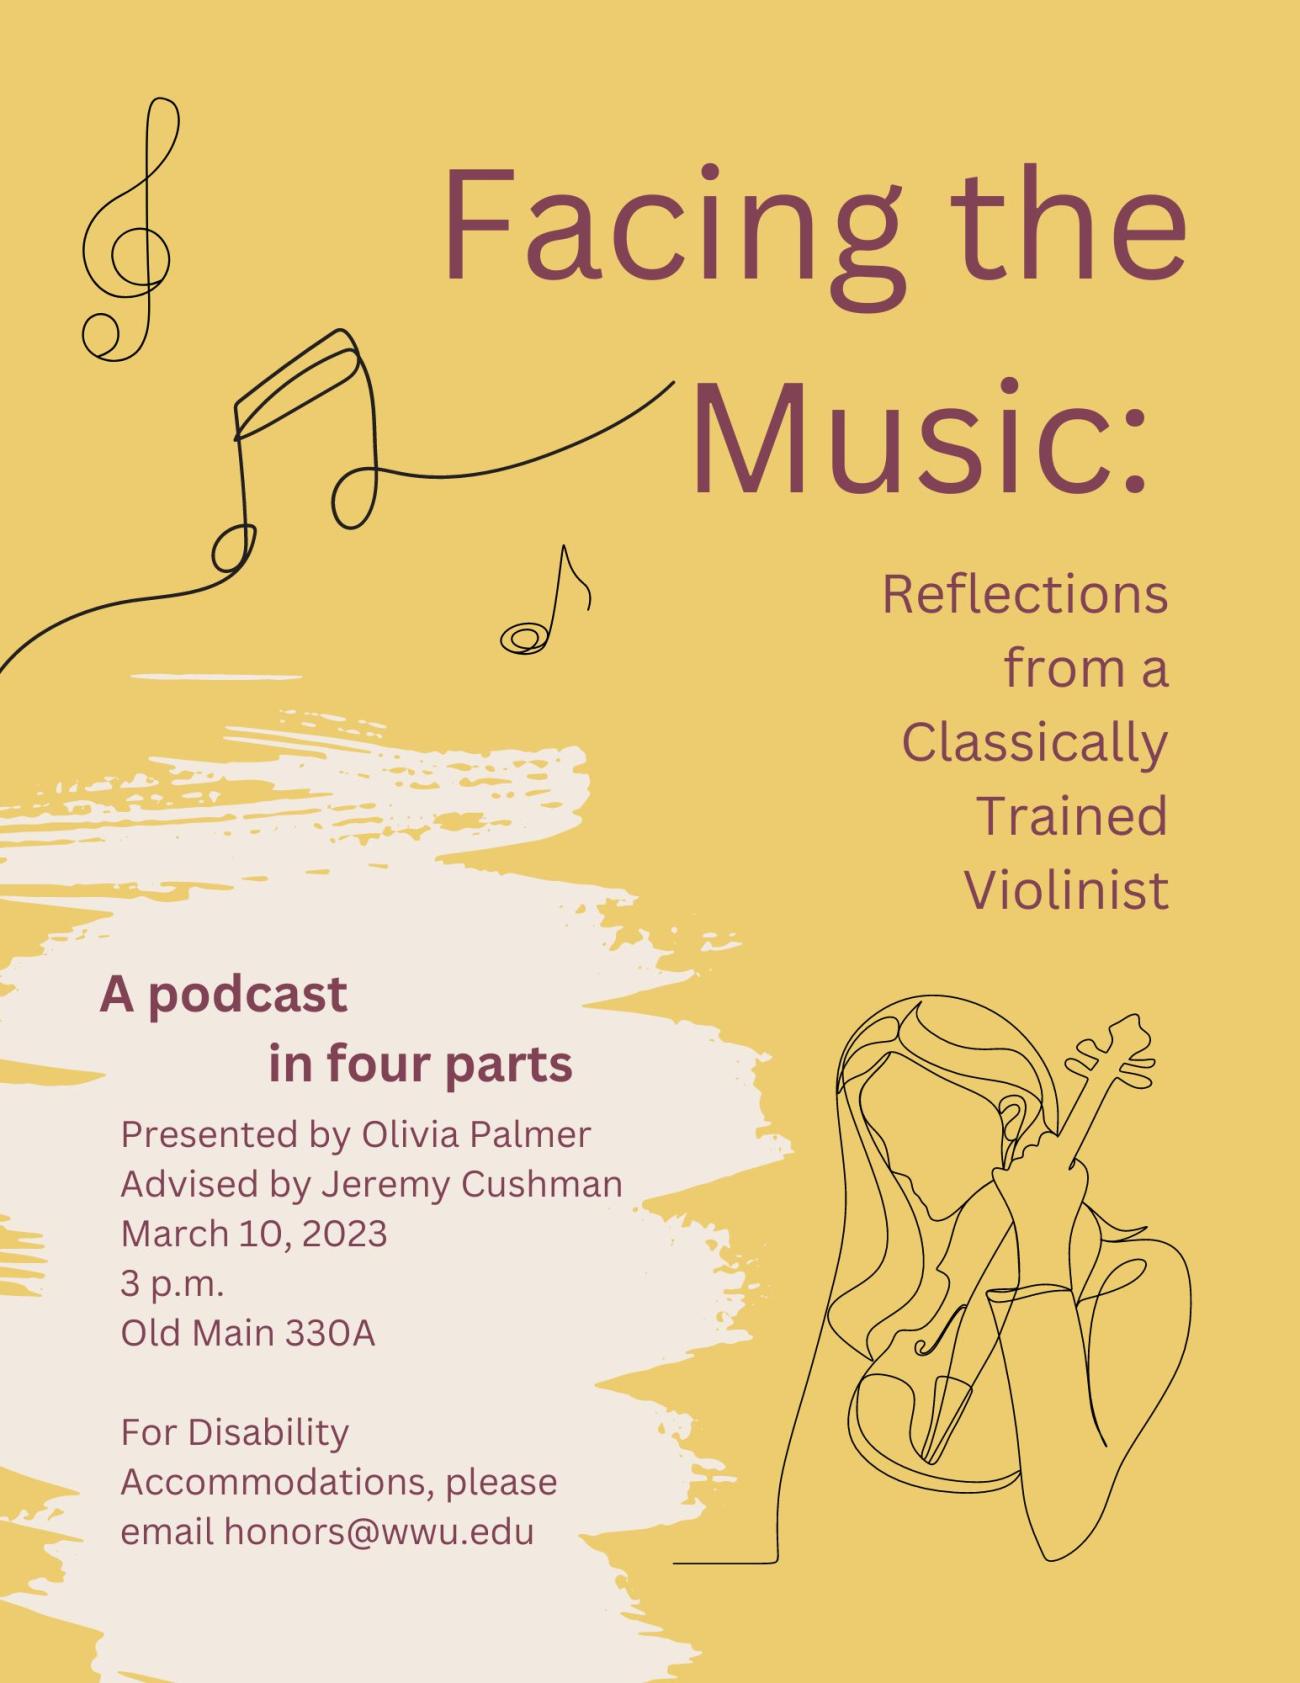 A poster with a line drawing of a violinist underneath a treble clef and set of musical notes. Text reads: "Facing the Music: Reflections from a Classically Trained Violinist. A podcast in four parts. Presented by Olivia Palmer, Advised by Jeremy Cushman. March 10, 2023, 3 PM. Old Man 330A. For Disability Accommodations, please email honors@wwu.edu."